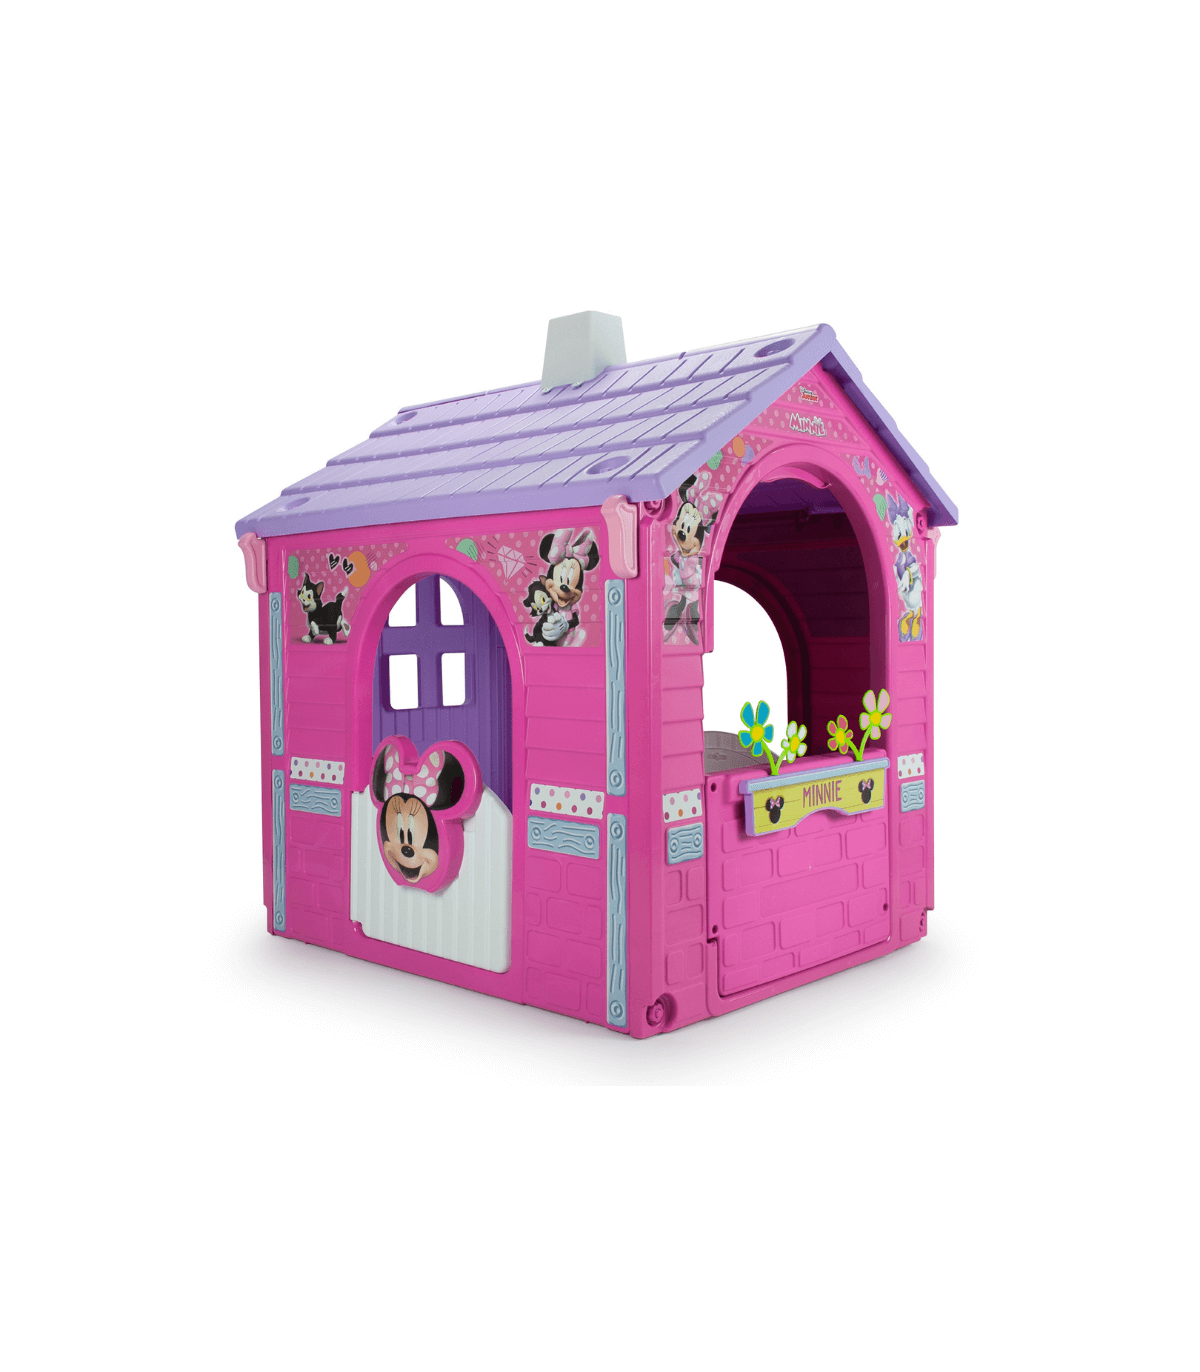 Minnie Mouse Toy House Colore Rosa